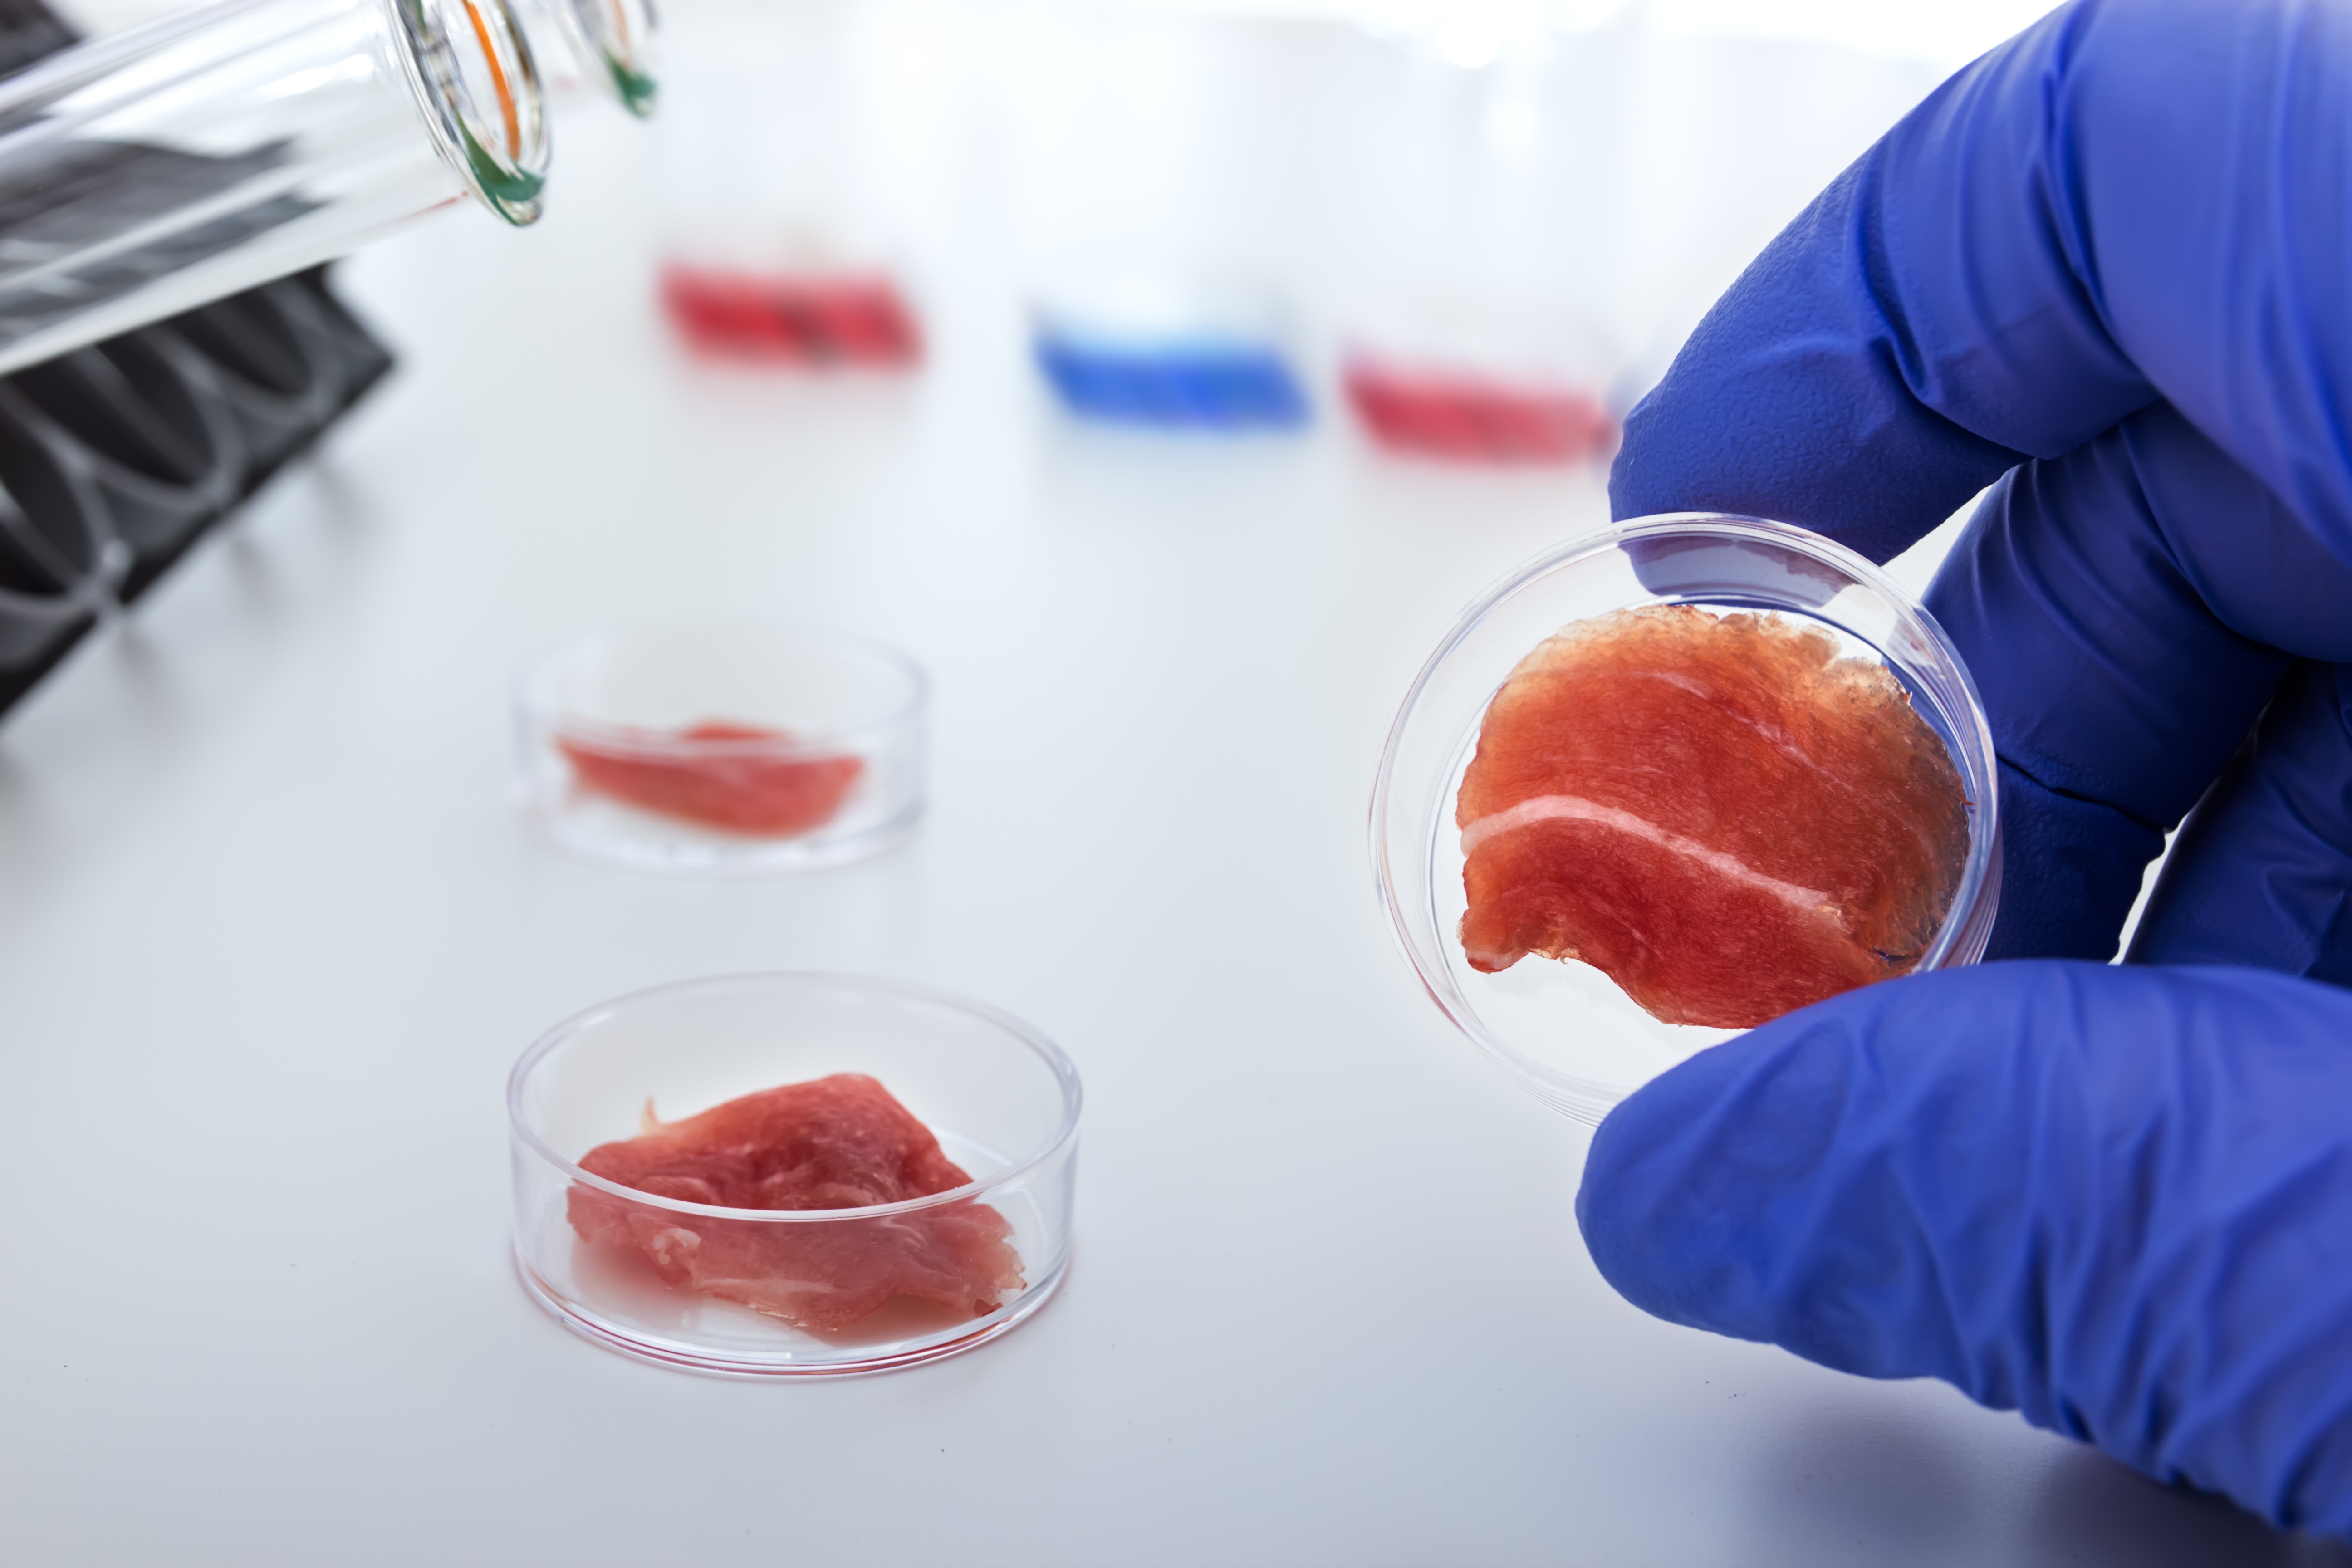 Sample of cell-based meat in a petri dish